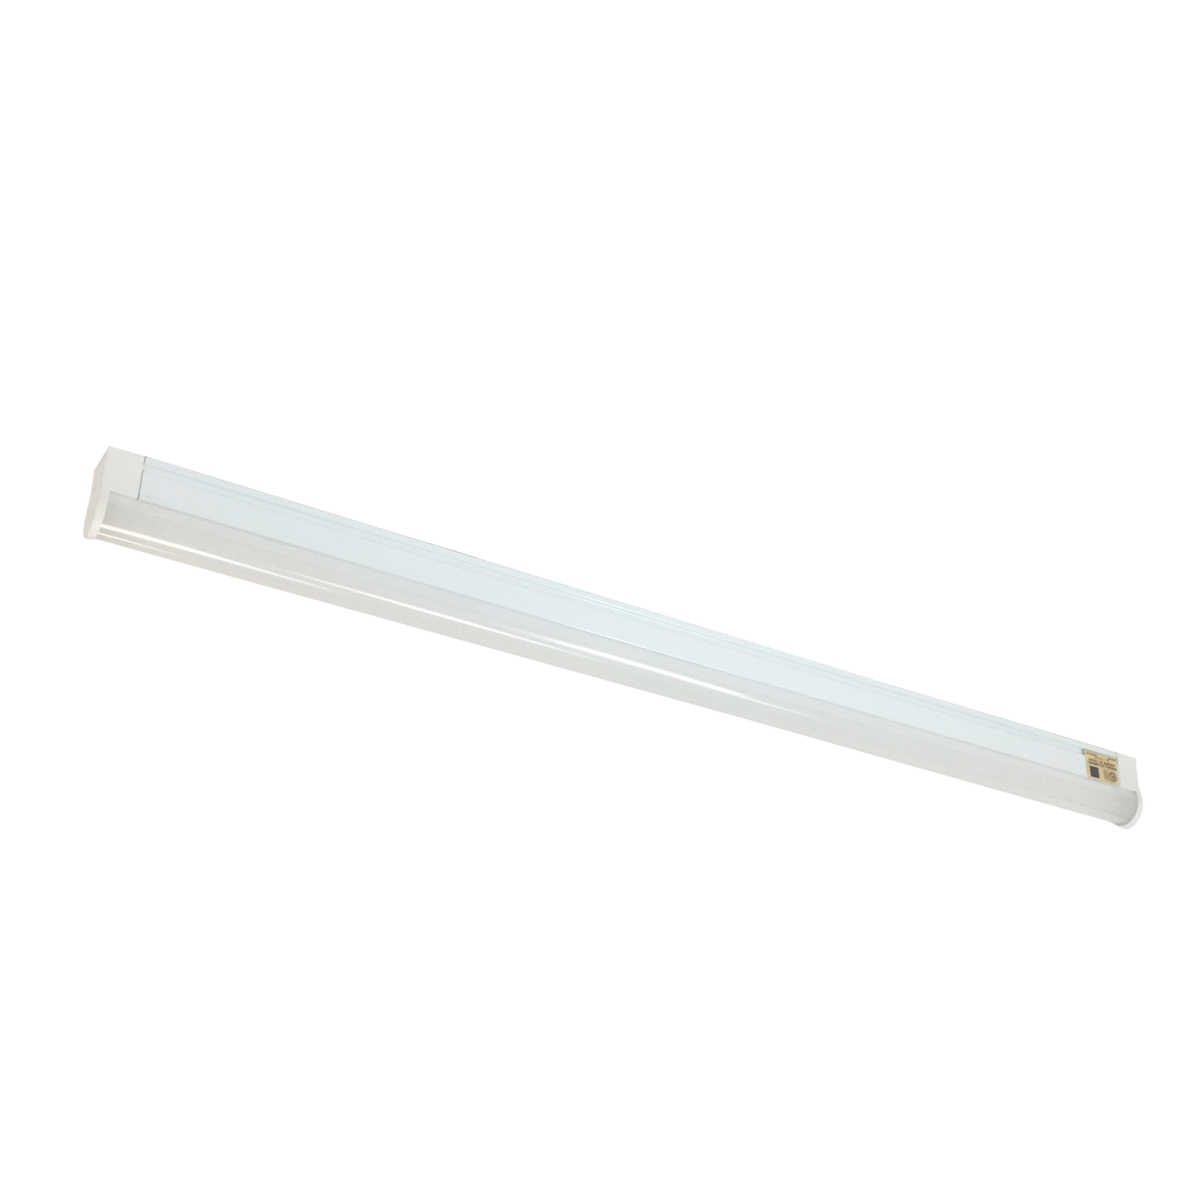 Picture of Nora Lighting NULS-LED1027W 10 in. 2700K Undercabinet Linear LED Fixture - White